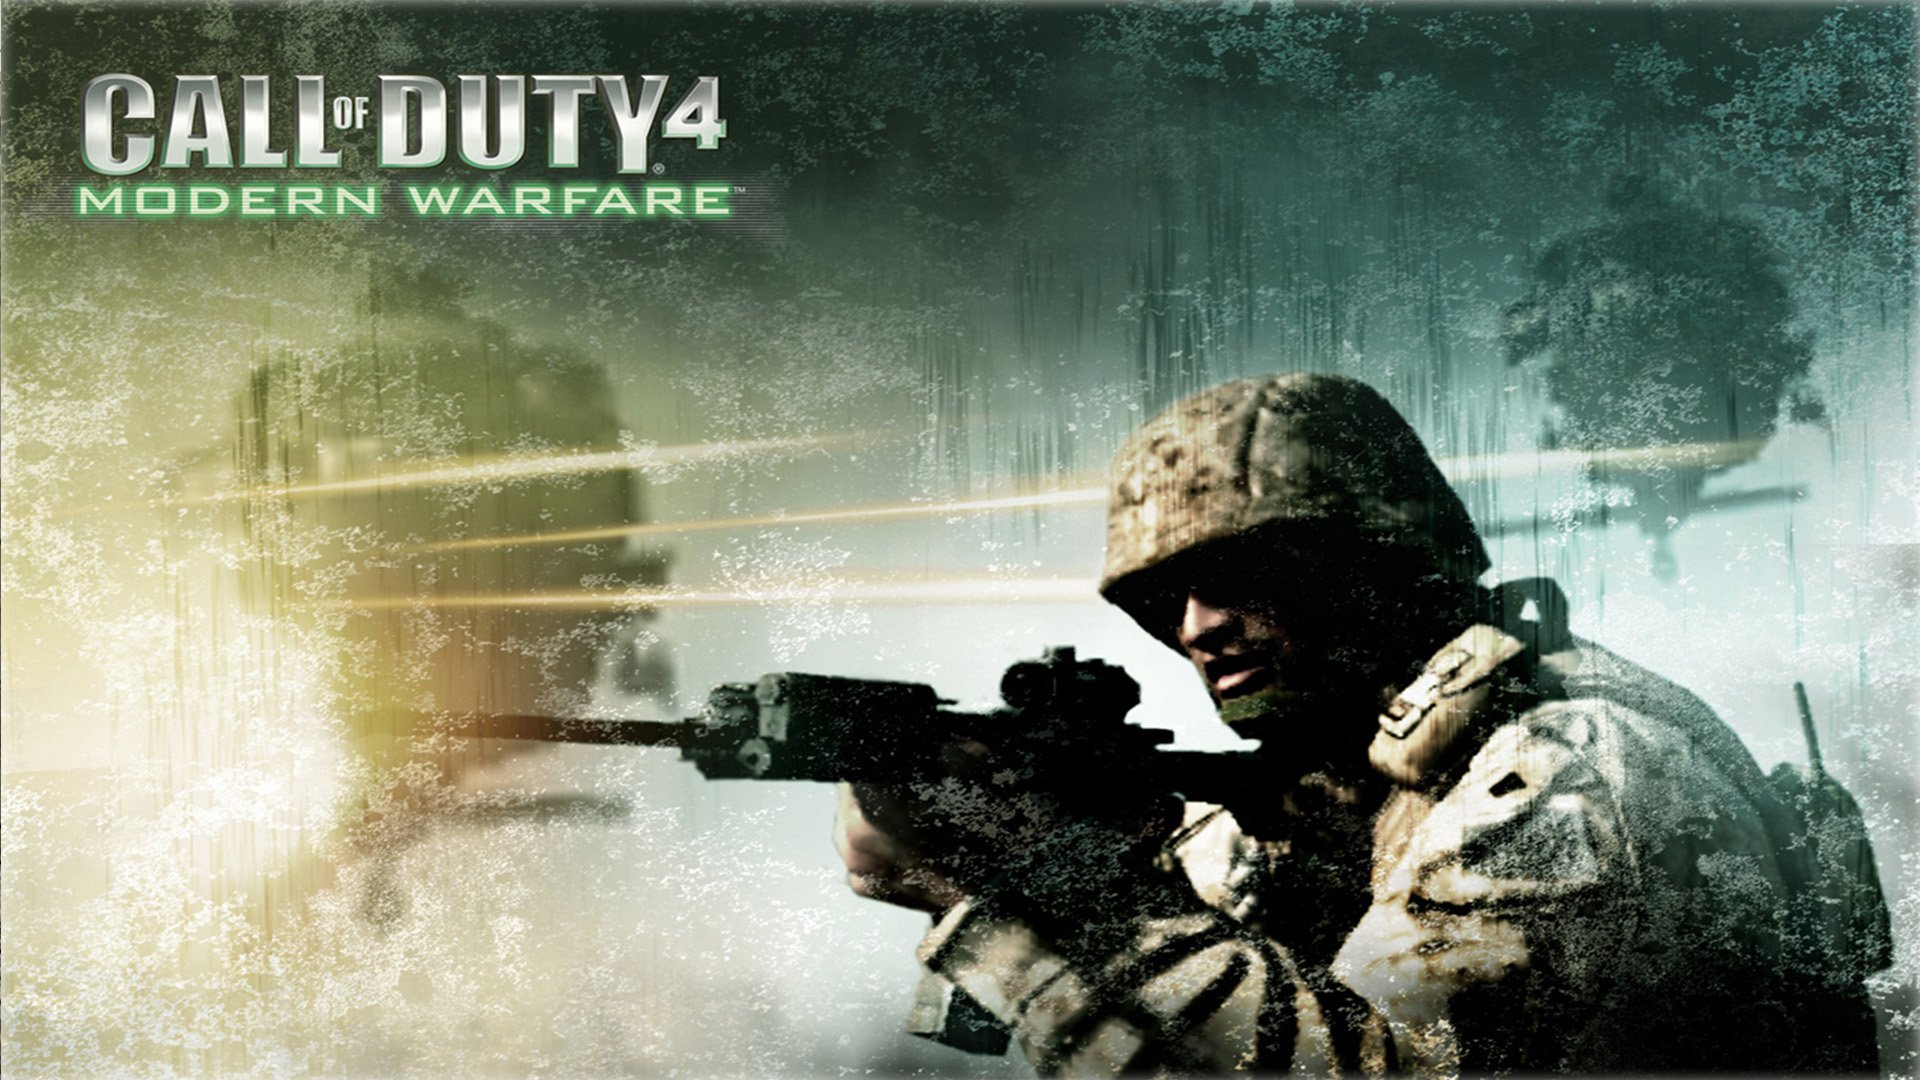 Call of Duty 4 сержант пол Джексон. Call of Duty Modern Warfare 4 Джексон. Пол Джексон Call of Duty Modern Warfare. Call of Duty 4 Modern Warfare Джексон пол.